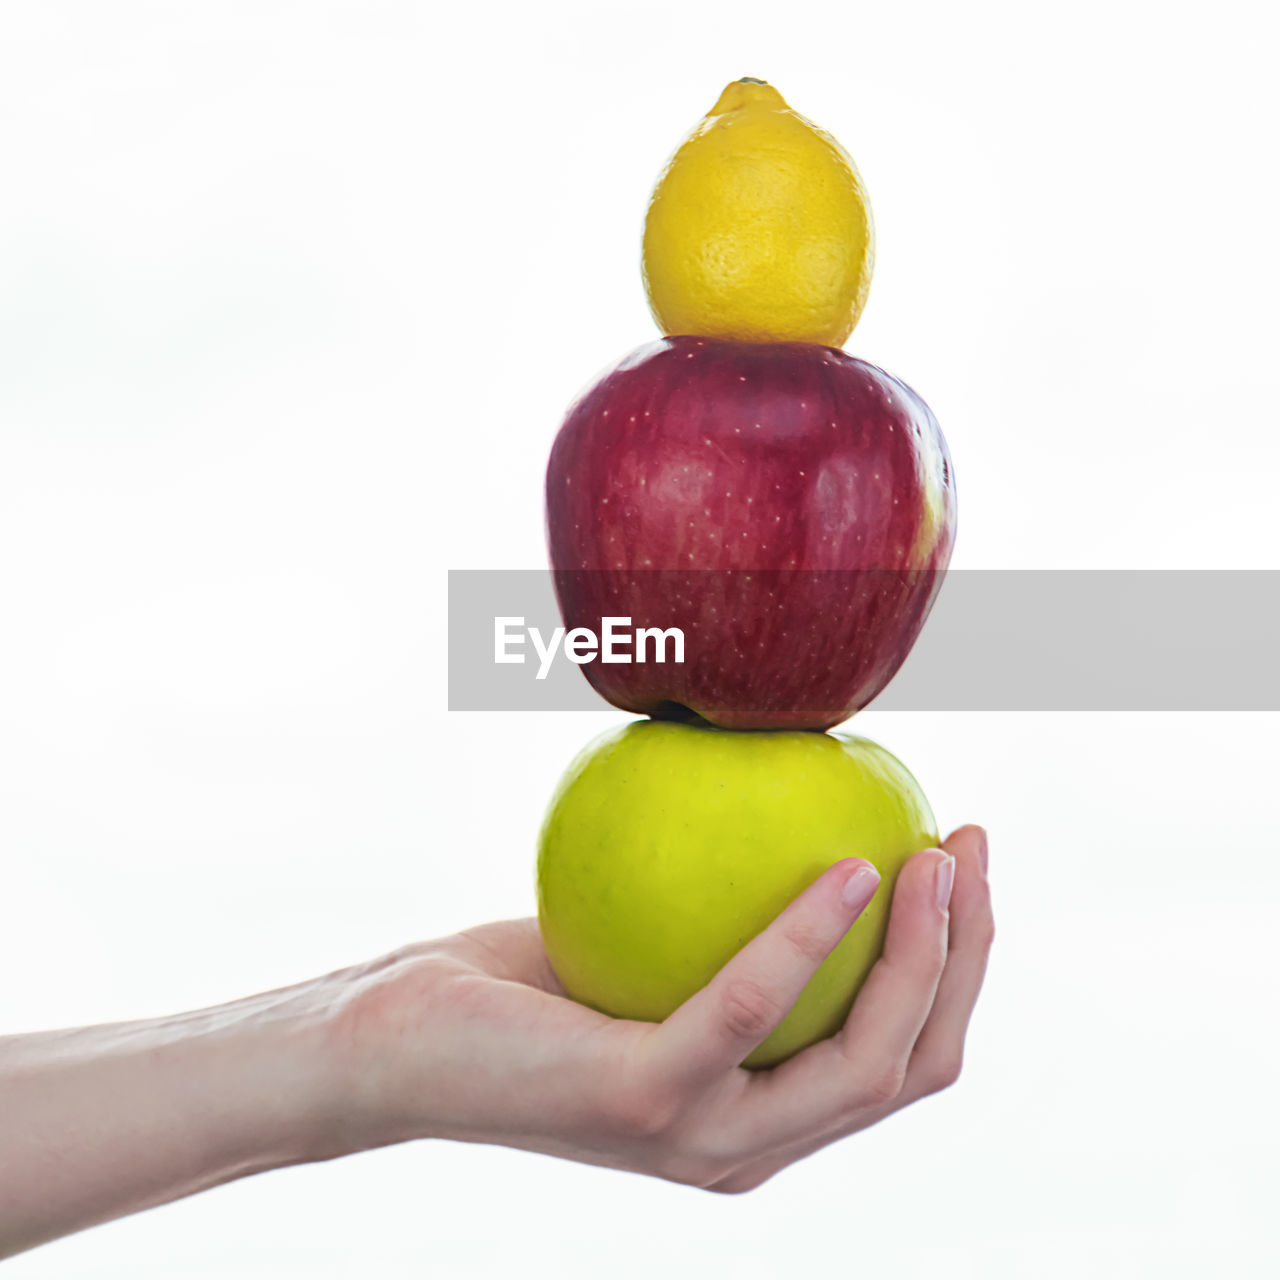 CLOSE-UP OF HAND HOLDING FRUITS OVER WHITE BACKGROUND